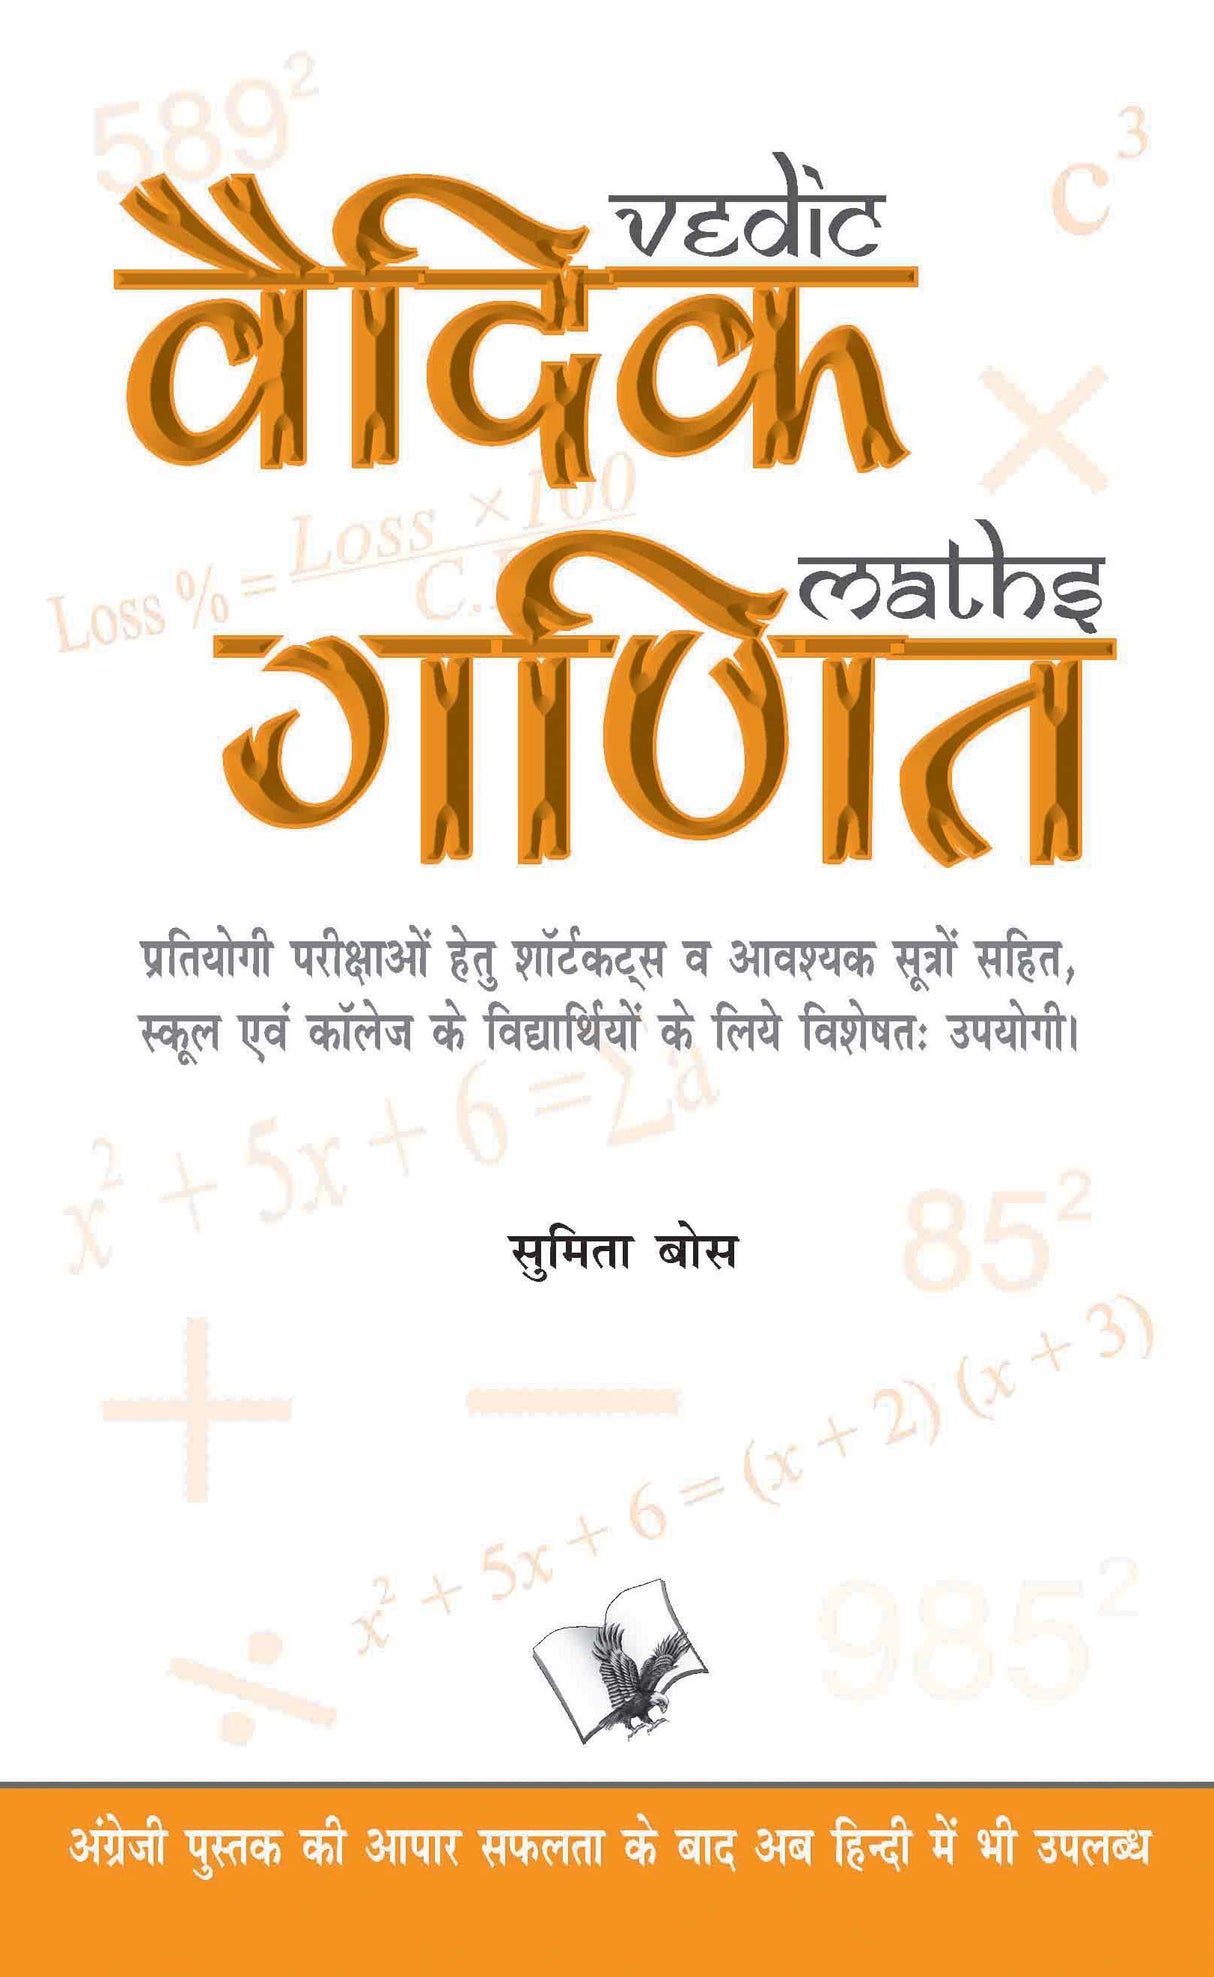 Vedic Ganit: Vedic tricks to solve arithmetical problems in a jiffy